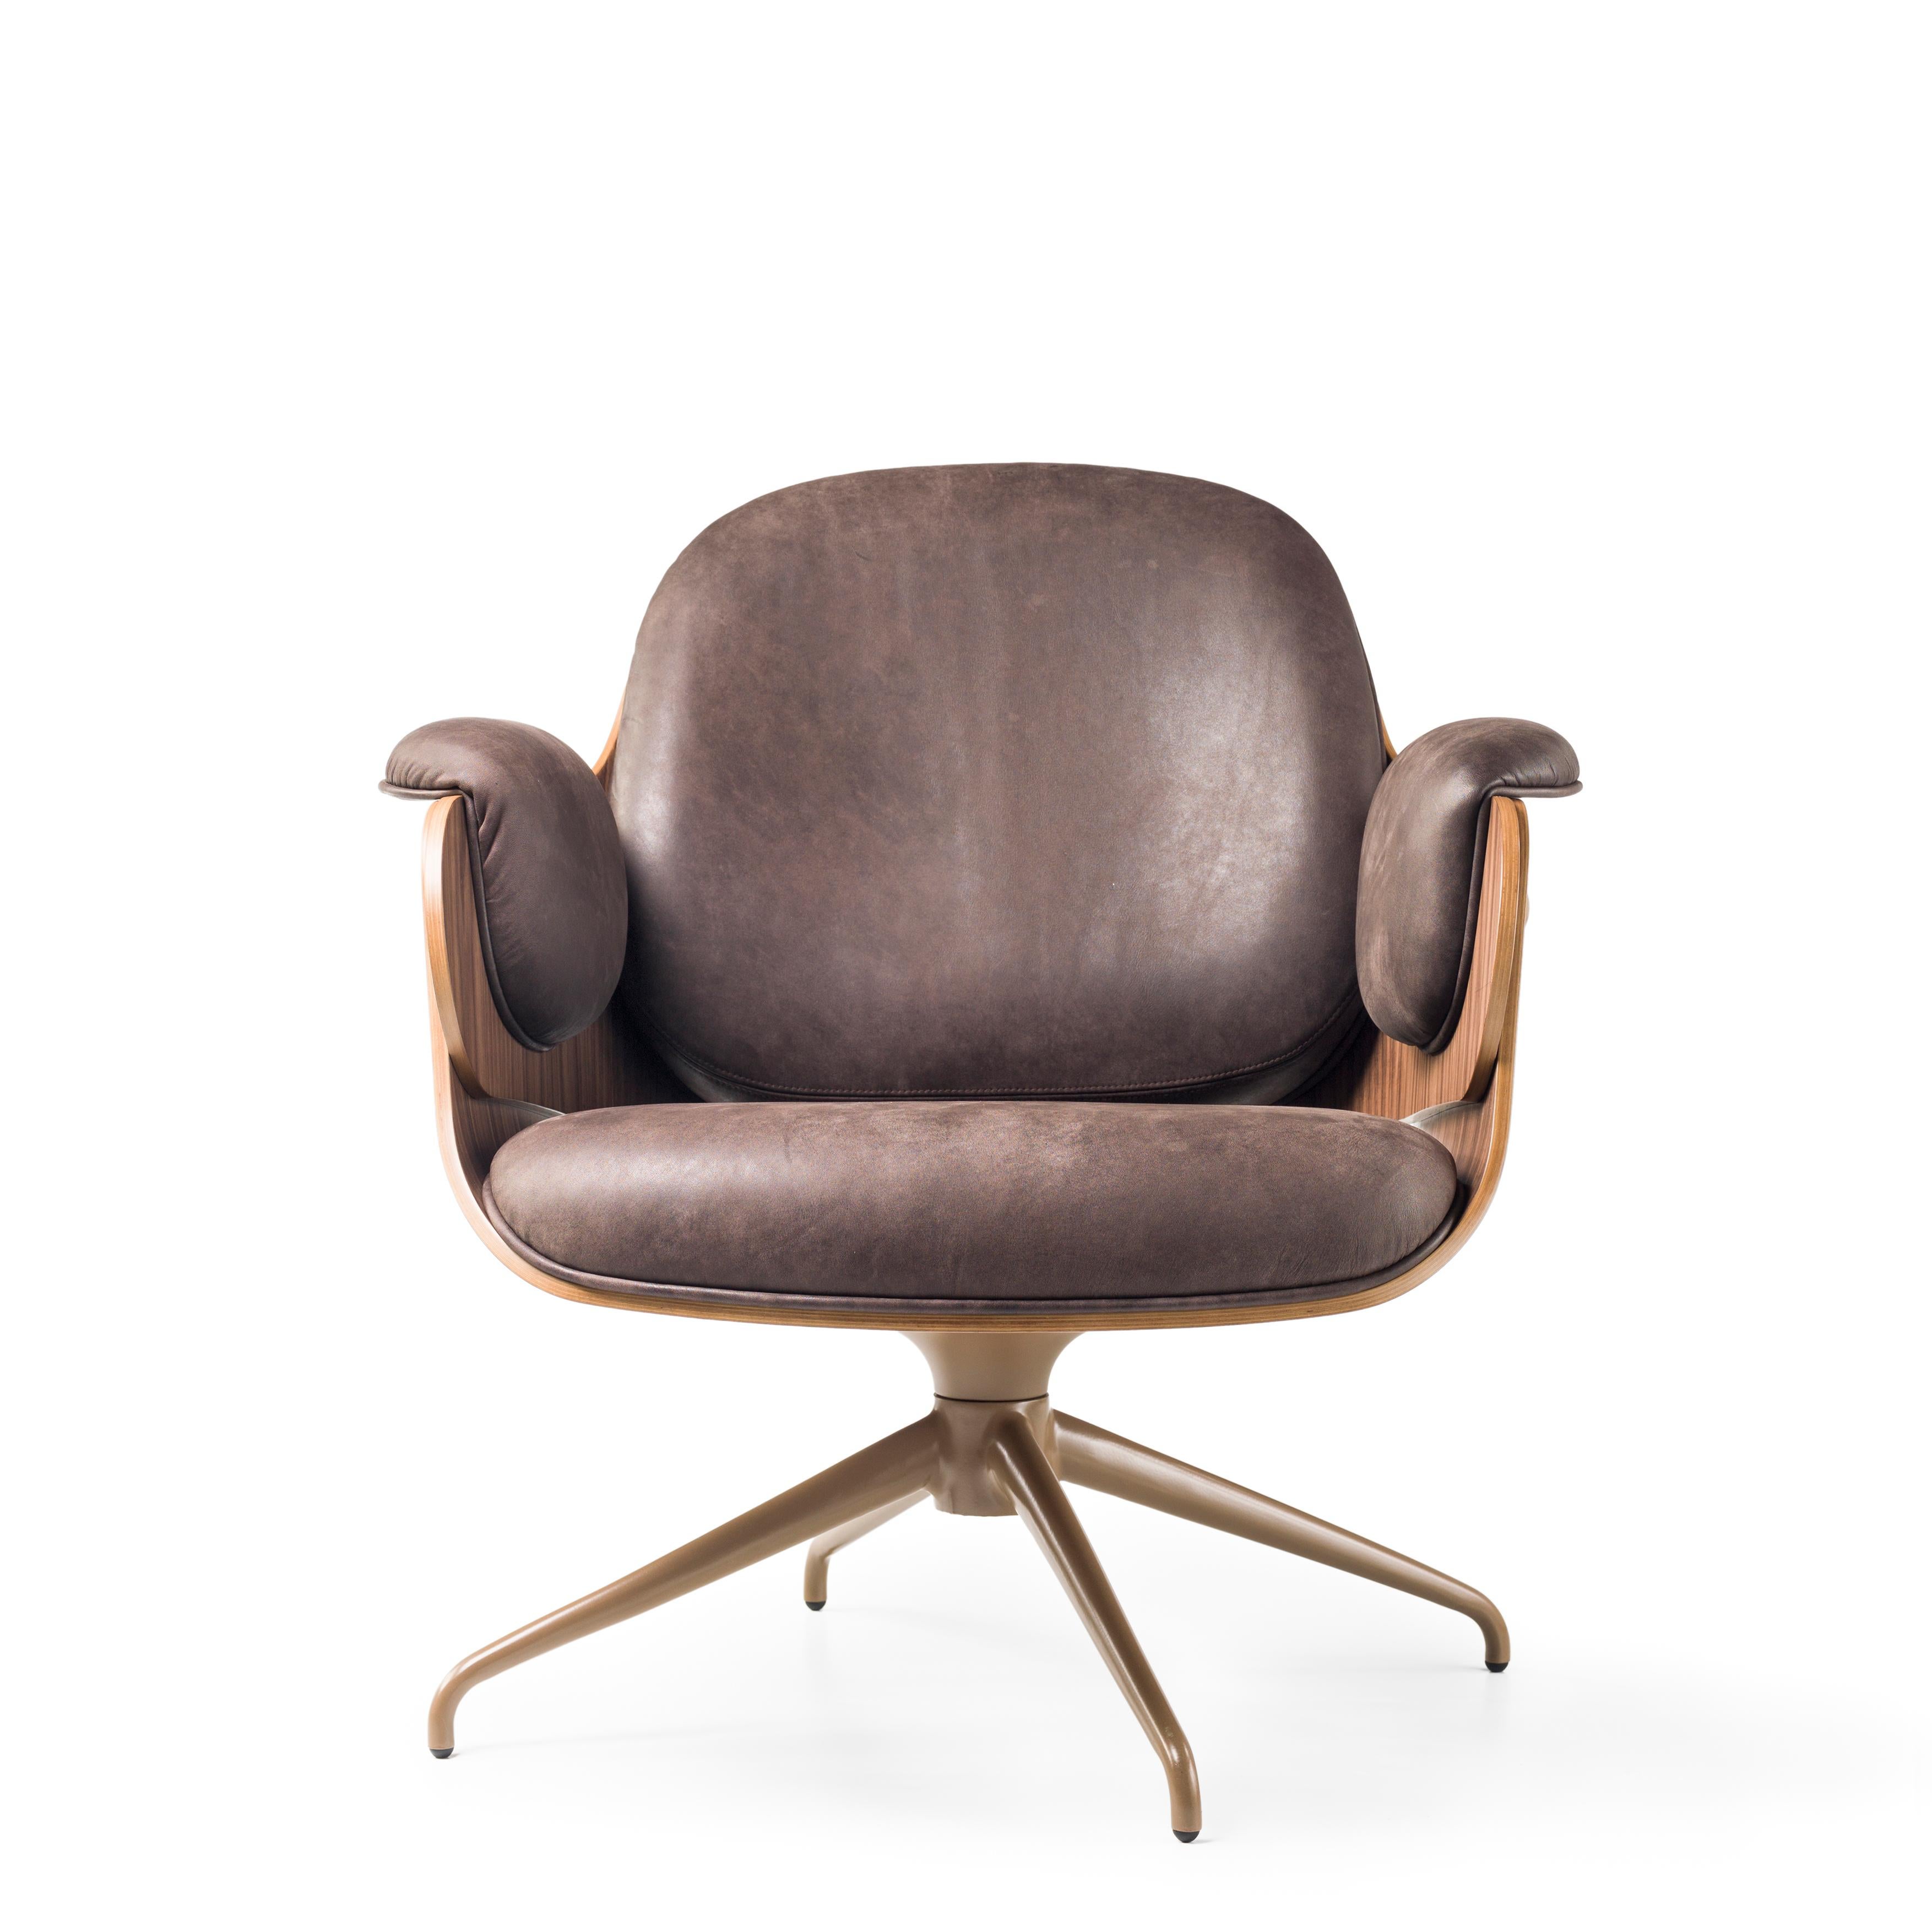 Modern Jaime Hayon, Contemporary, Plywood Walnut Leather Low Lounger Armchair